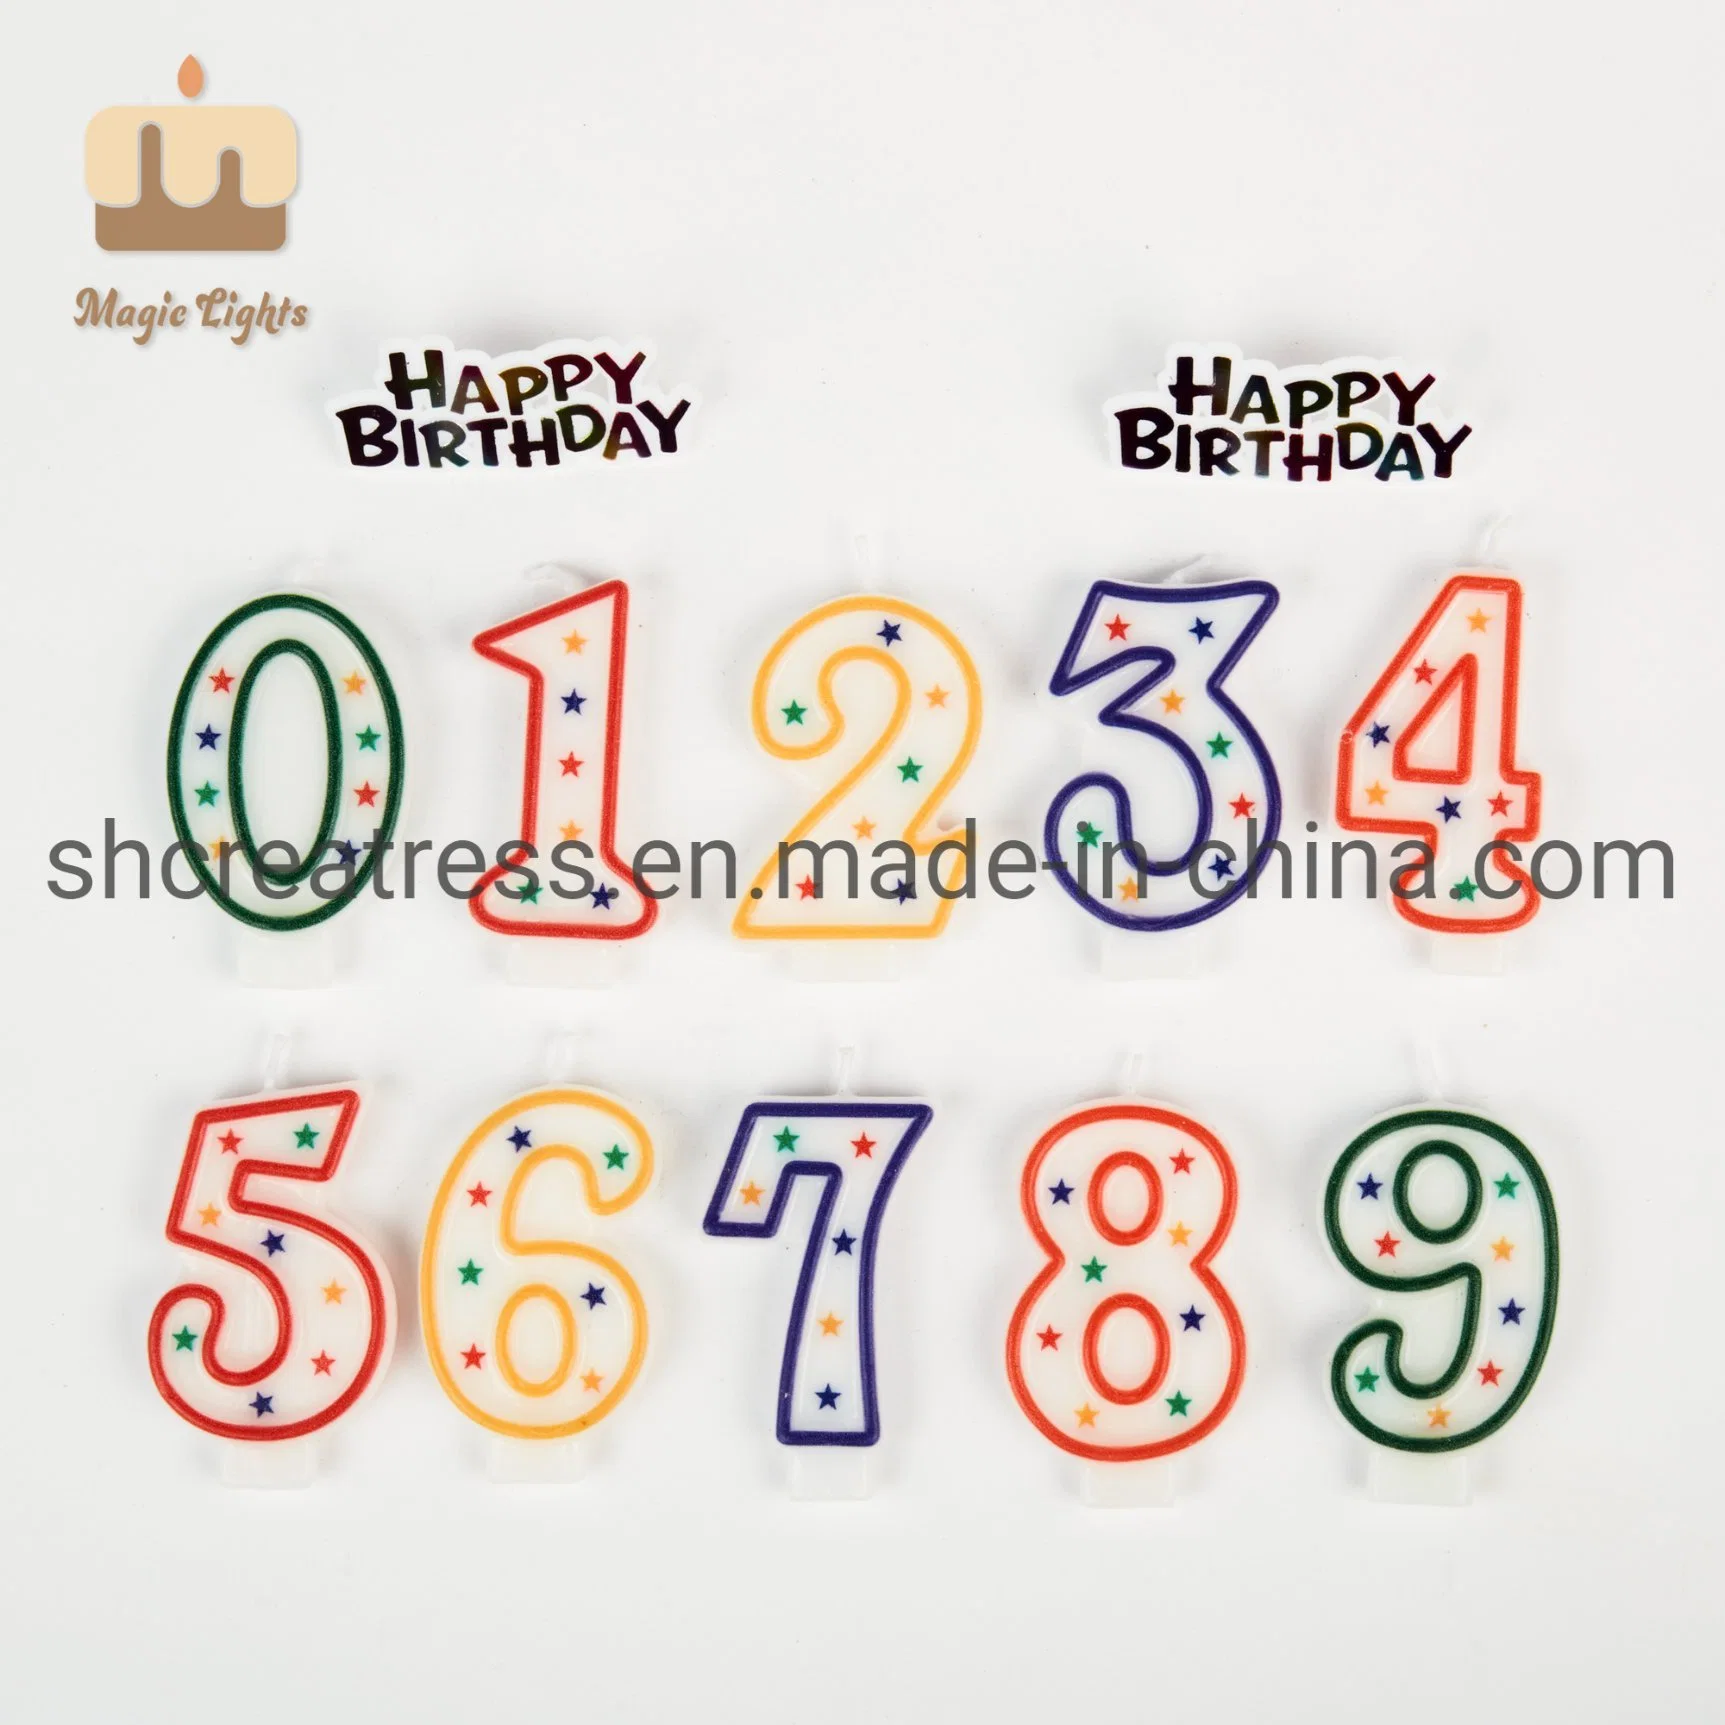 Birthday Wedding Party Glitter Shinny Multicolour Number Candles in Holder